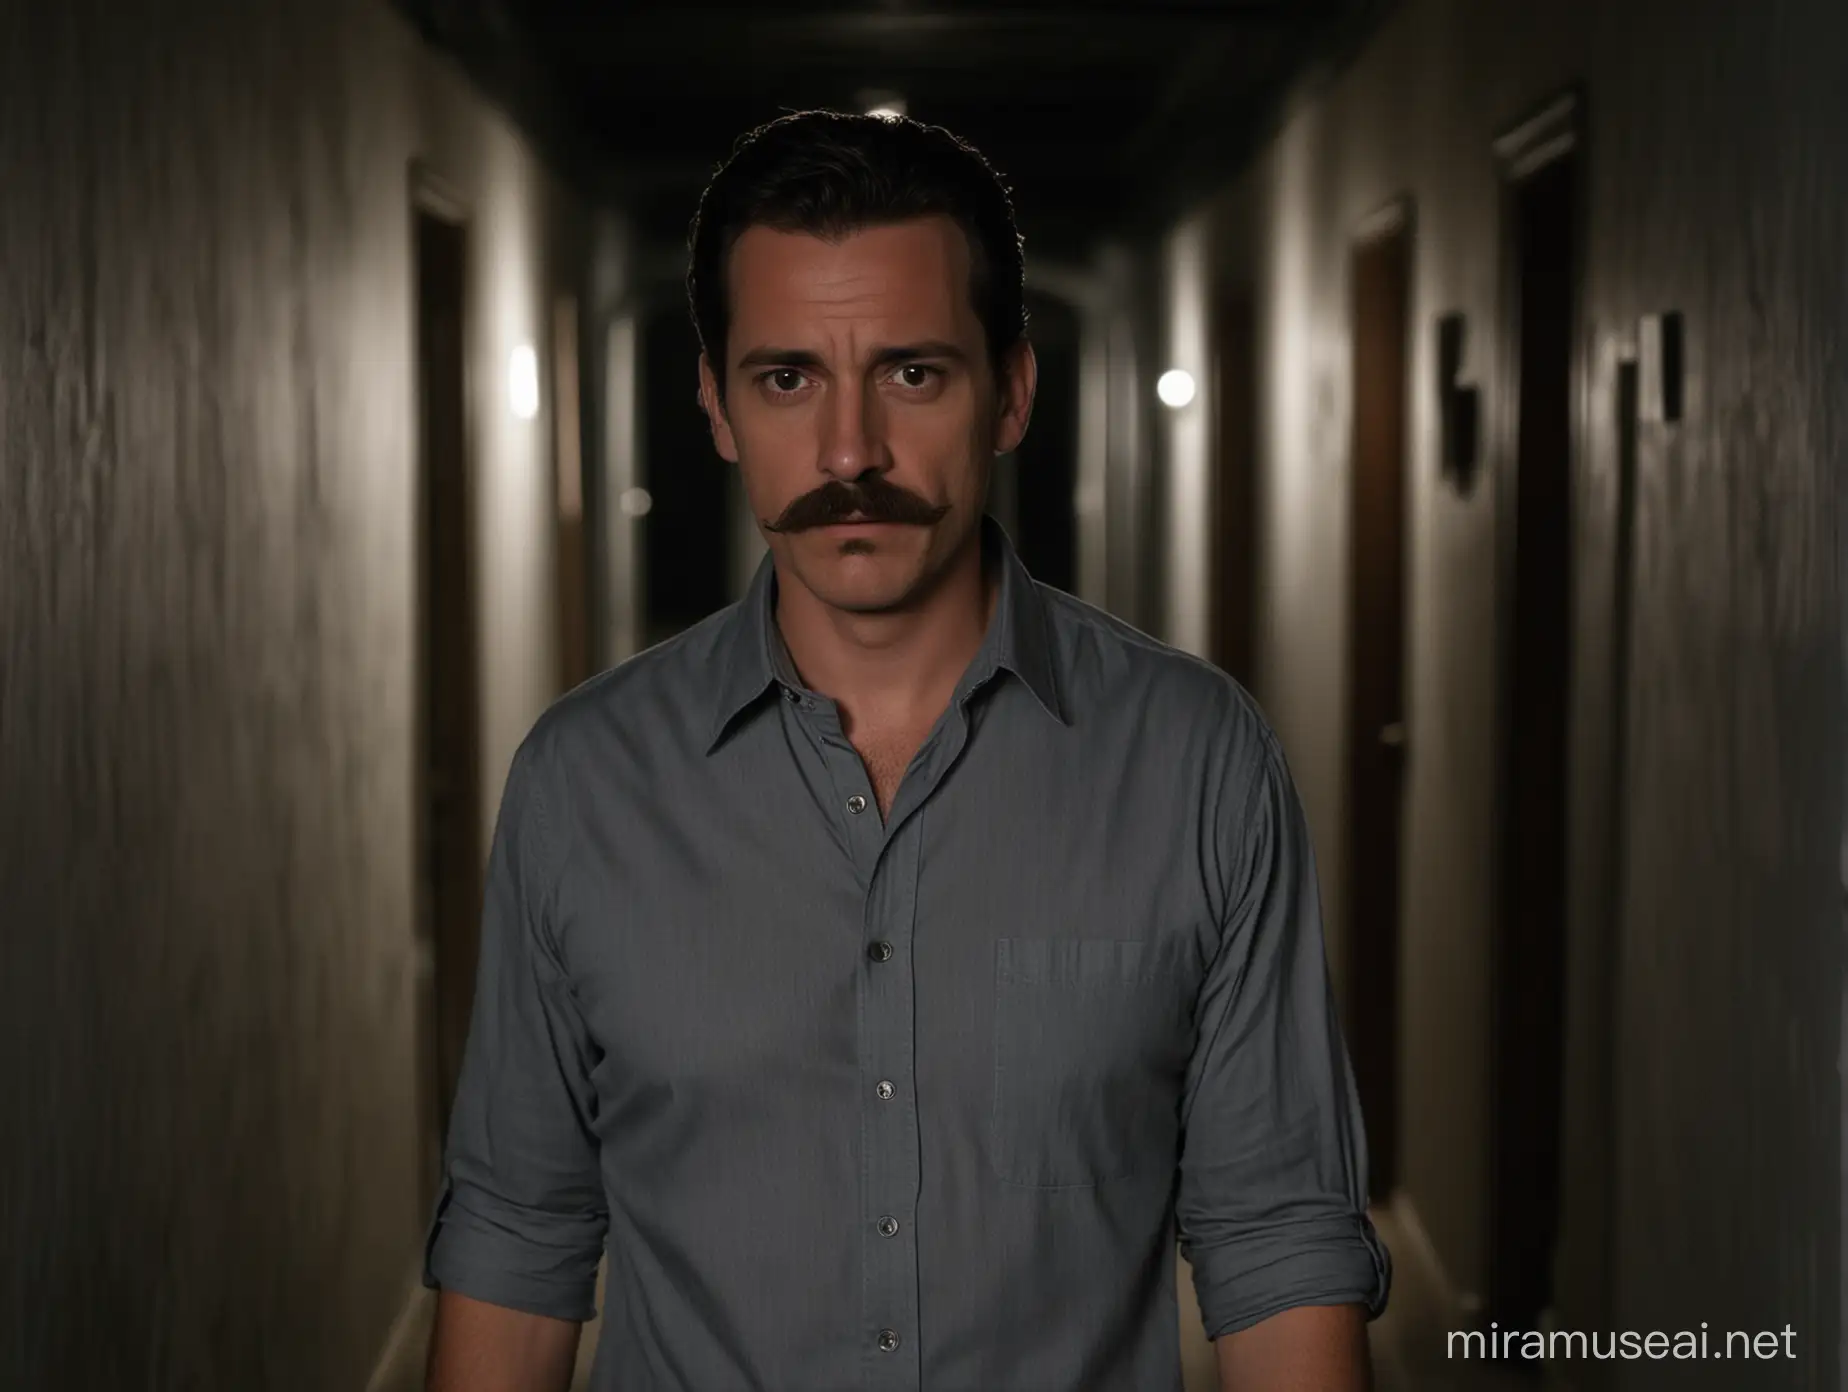 Serious Man with Mustache Walking Through Dark House at Night